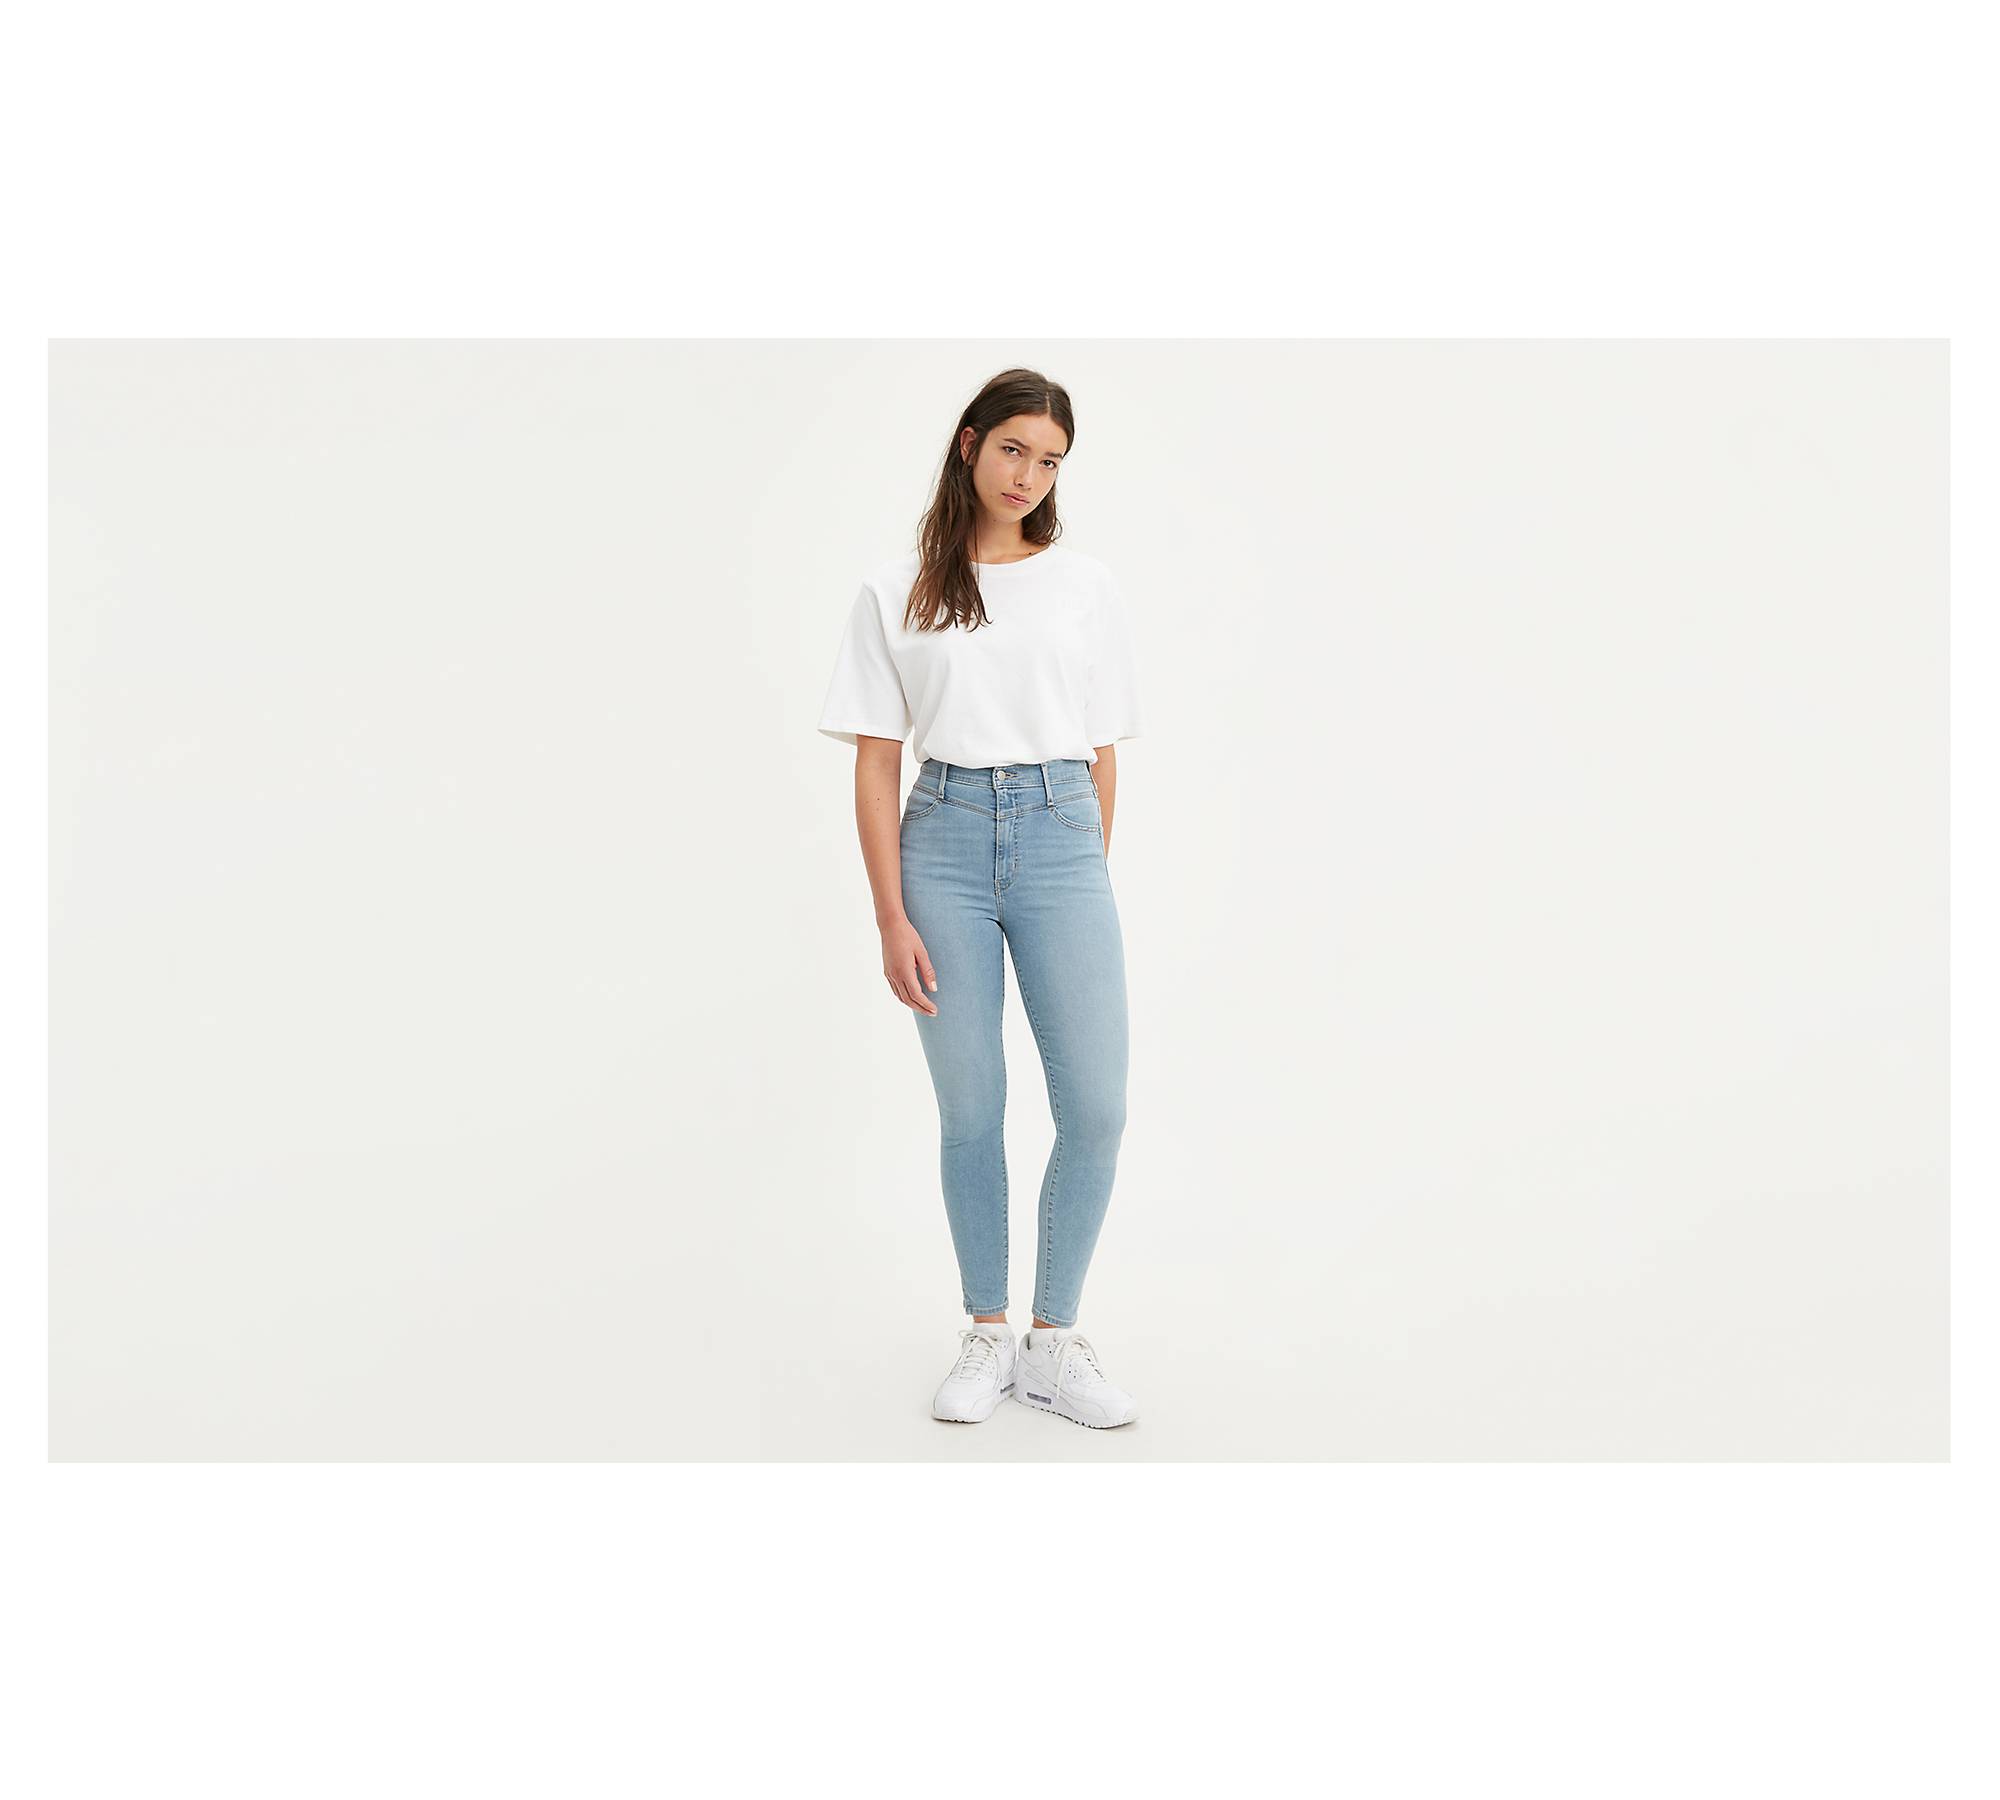 Mile High Booty Women's Jeans - Light Wash | Levi's® US